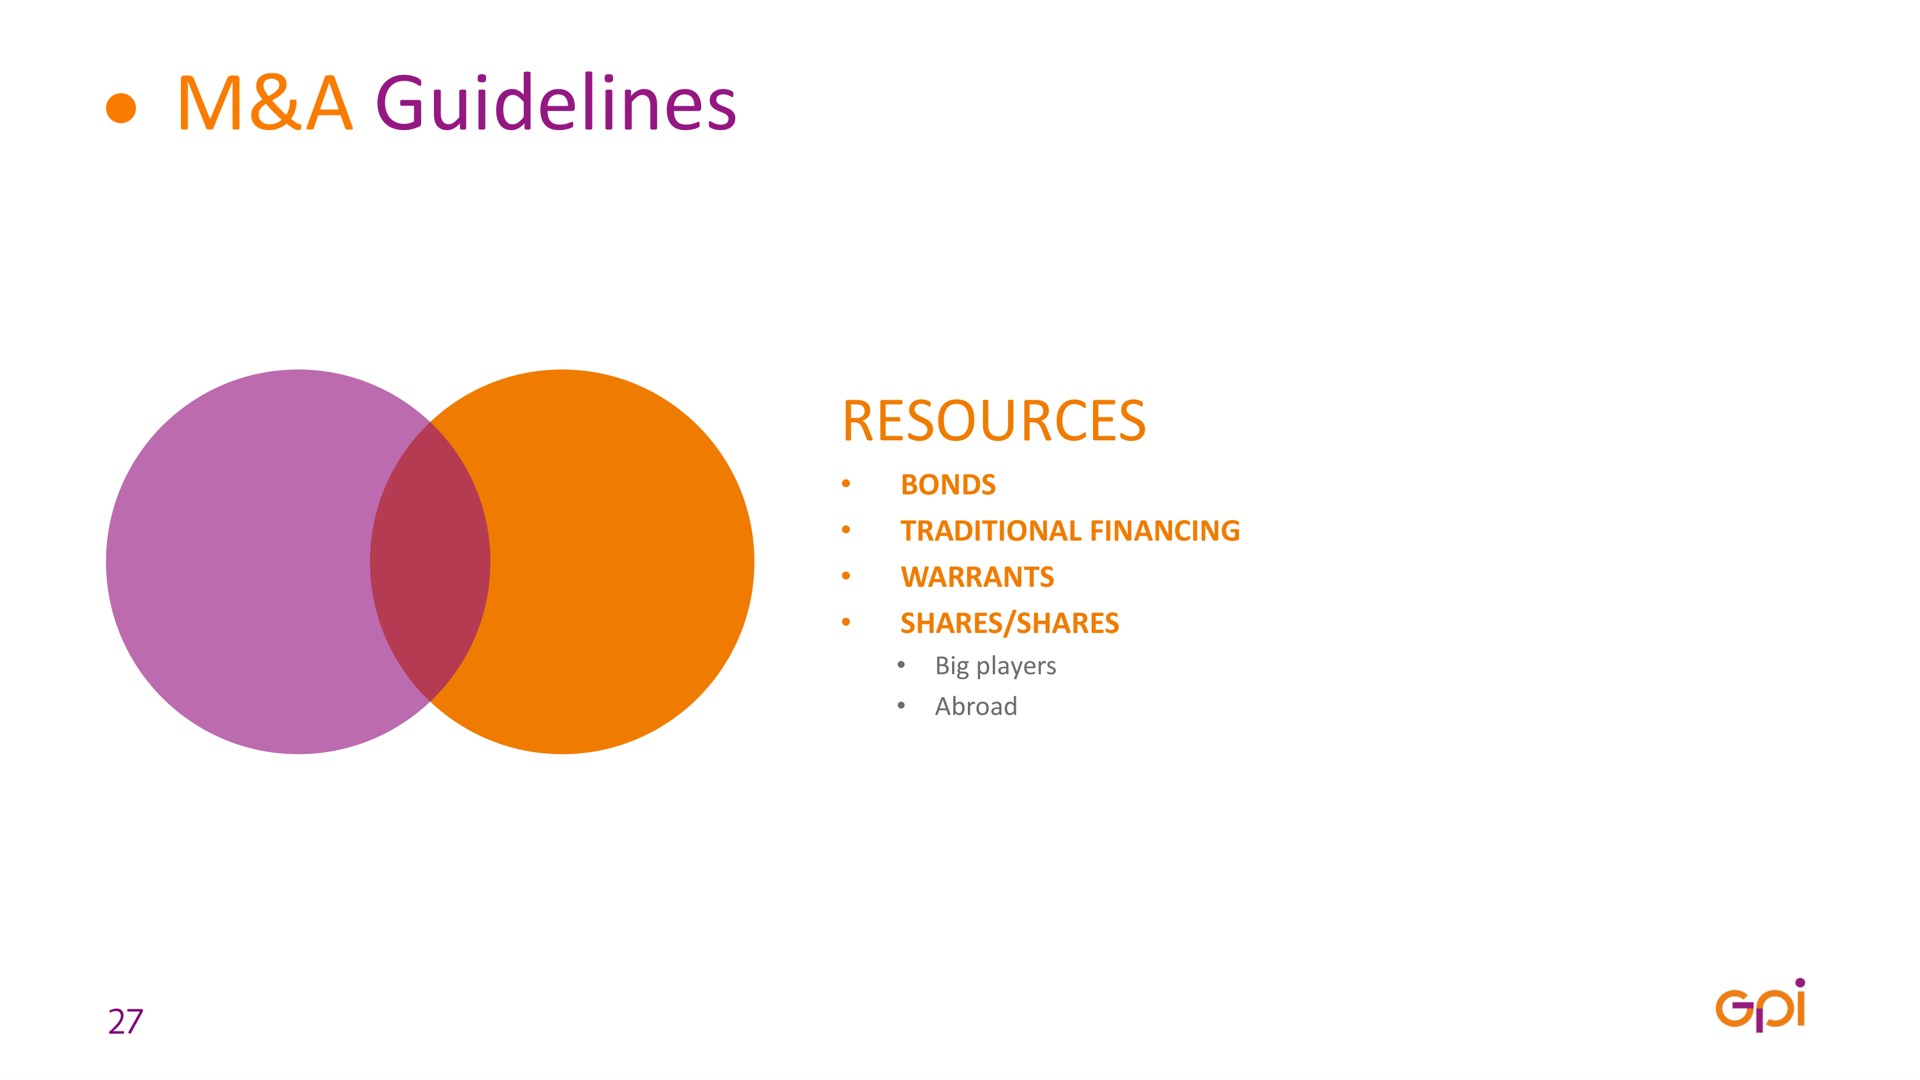 a guidelines resources gol | GPI